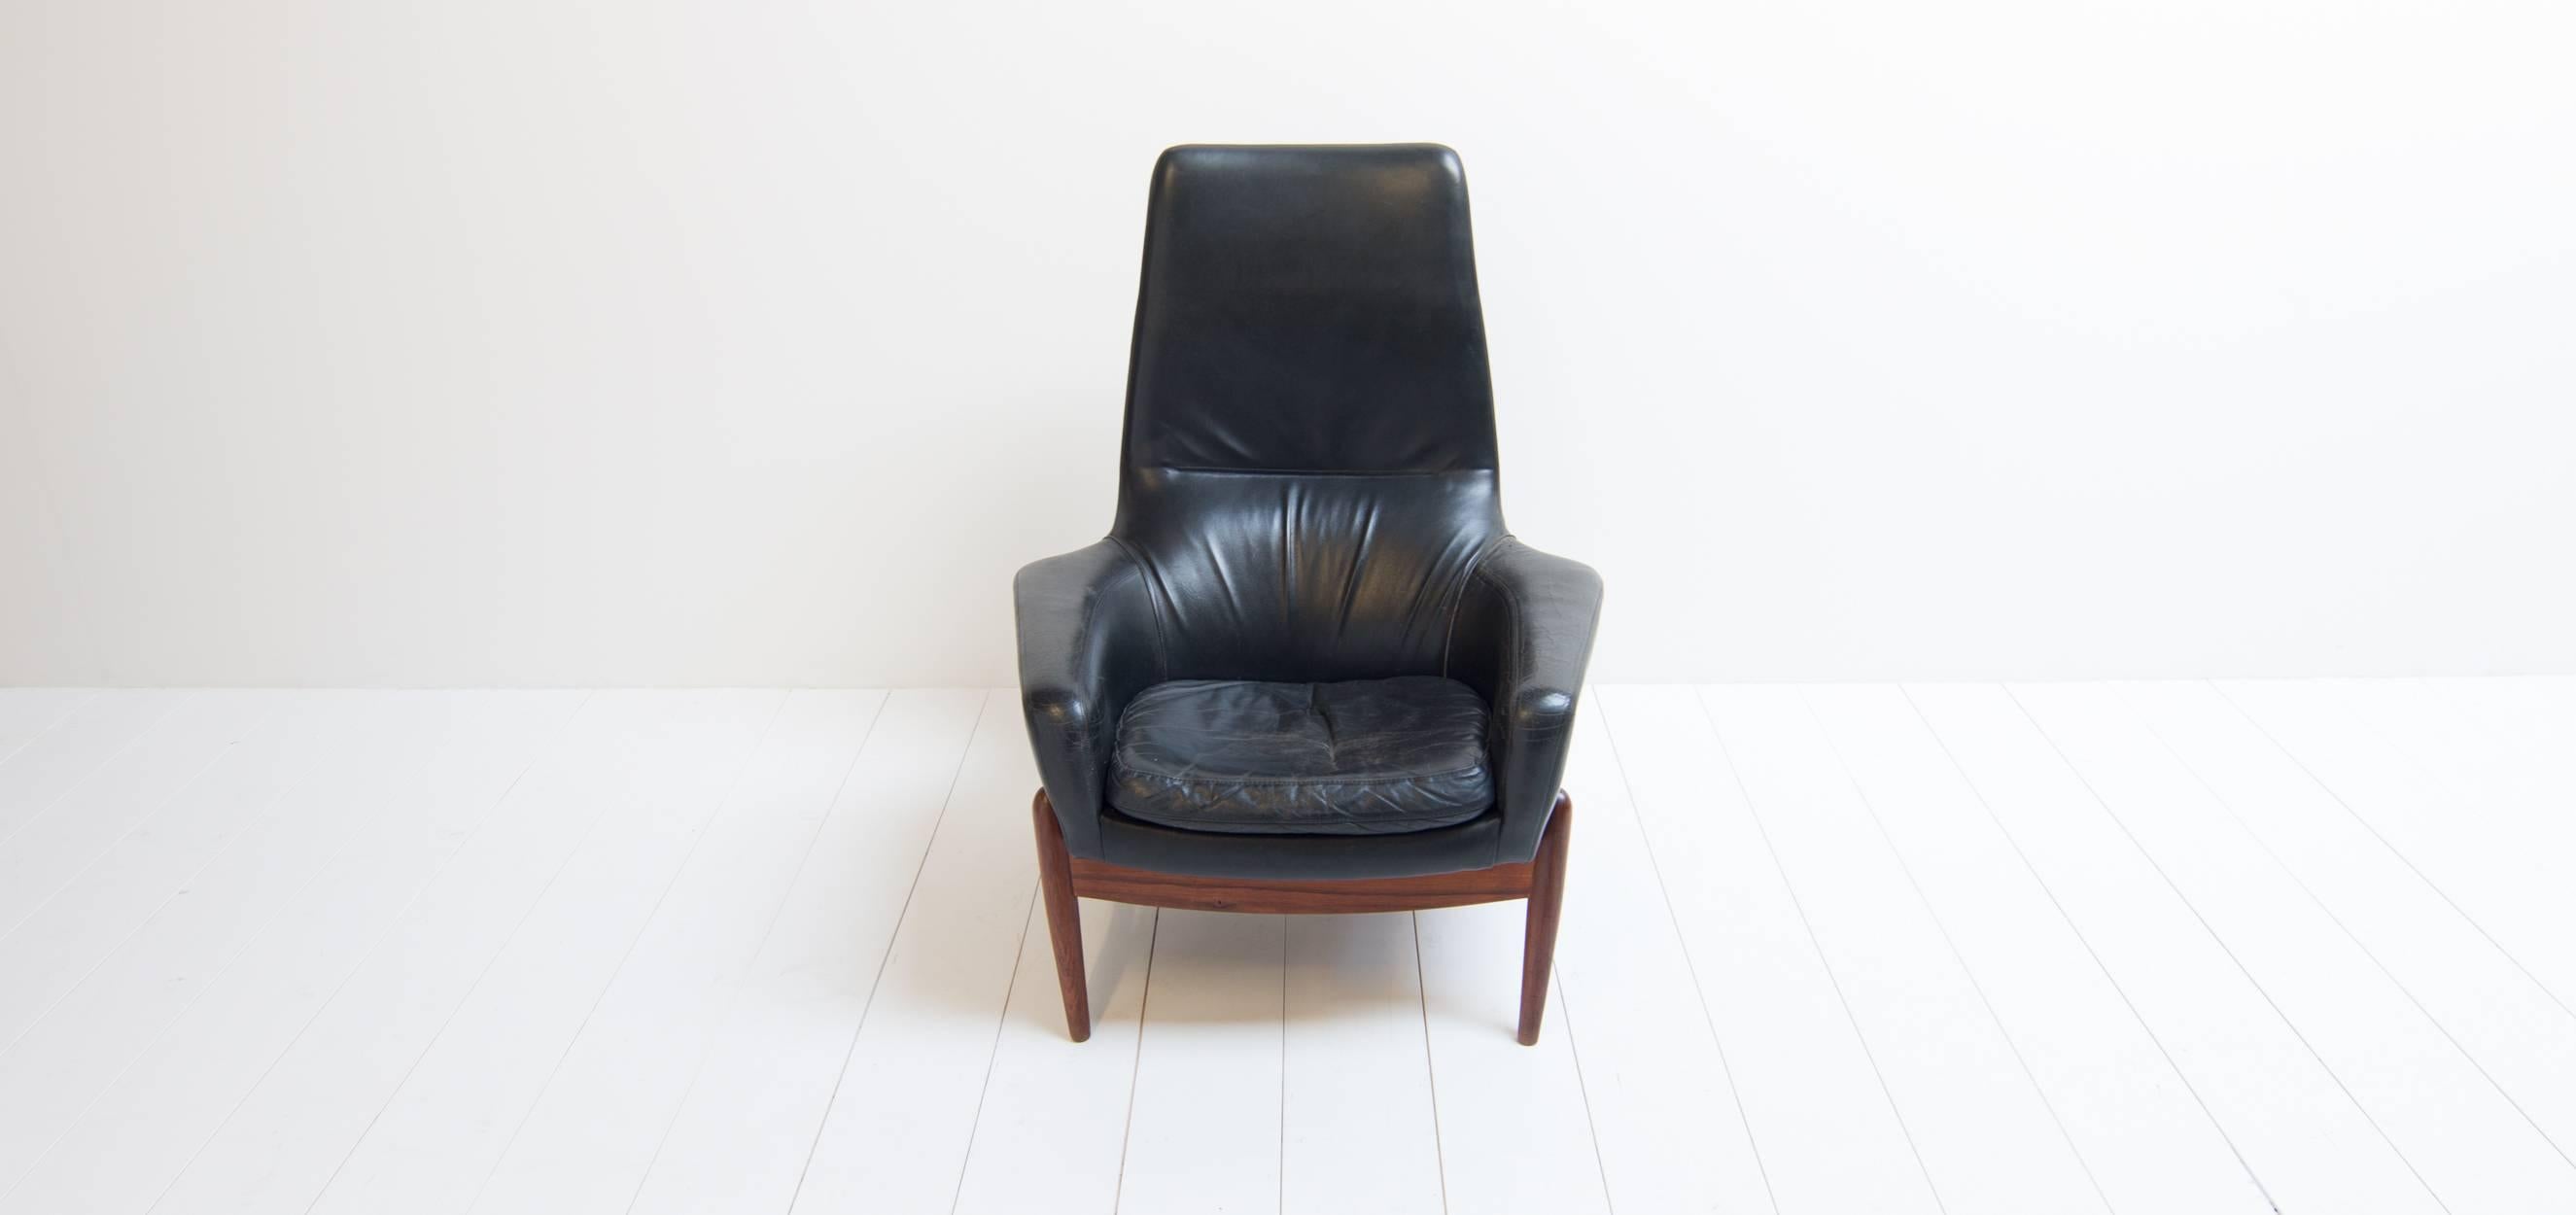 Ib Kofod Larsen Bovenkamp Lounge Chair from the 1960s For Sale 2